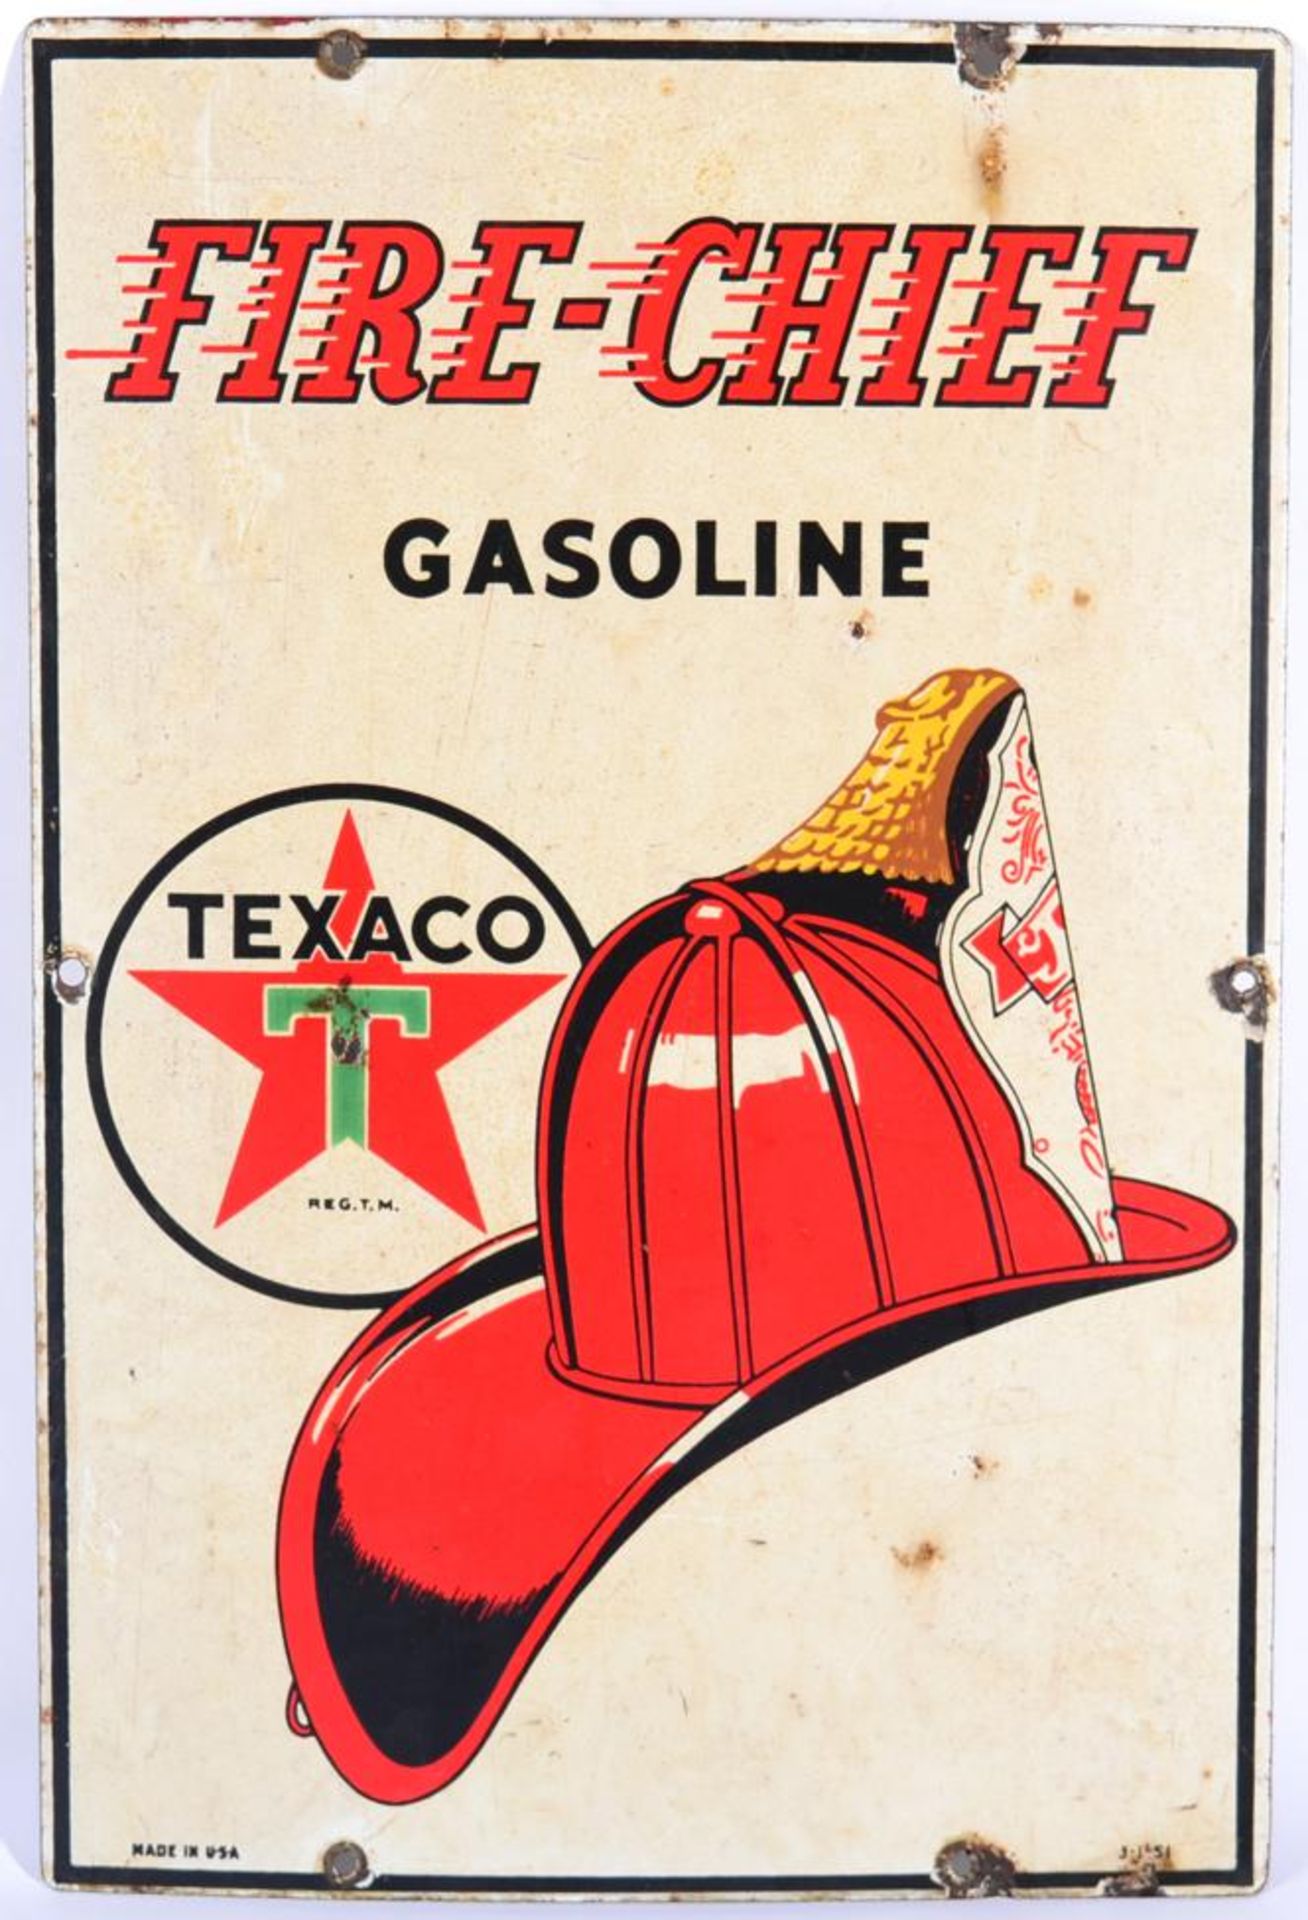 An American Single-Sided Enamel Advertising Sign: FIRE-CHIEF GASOLINE TEXACO REG.T.M., the corners